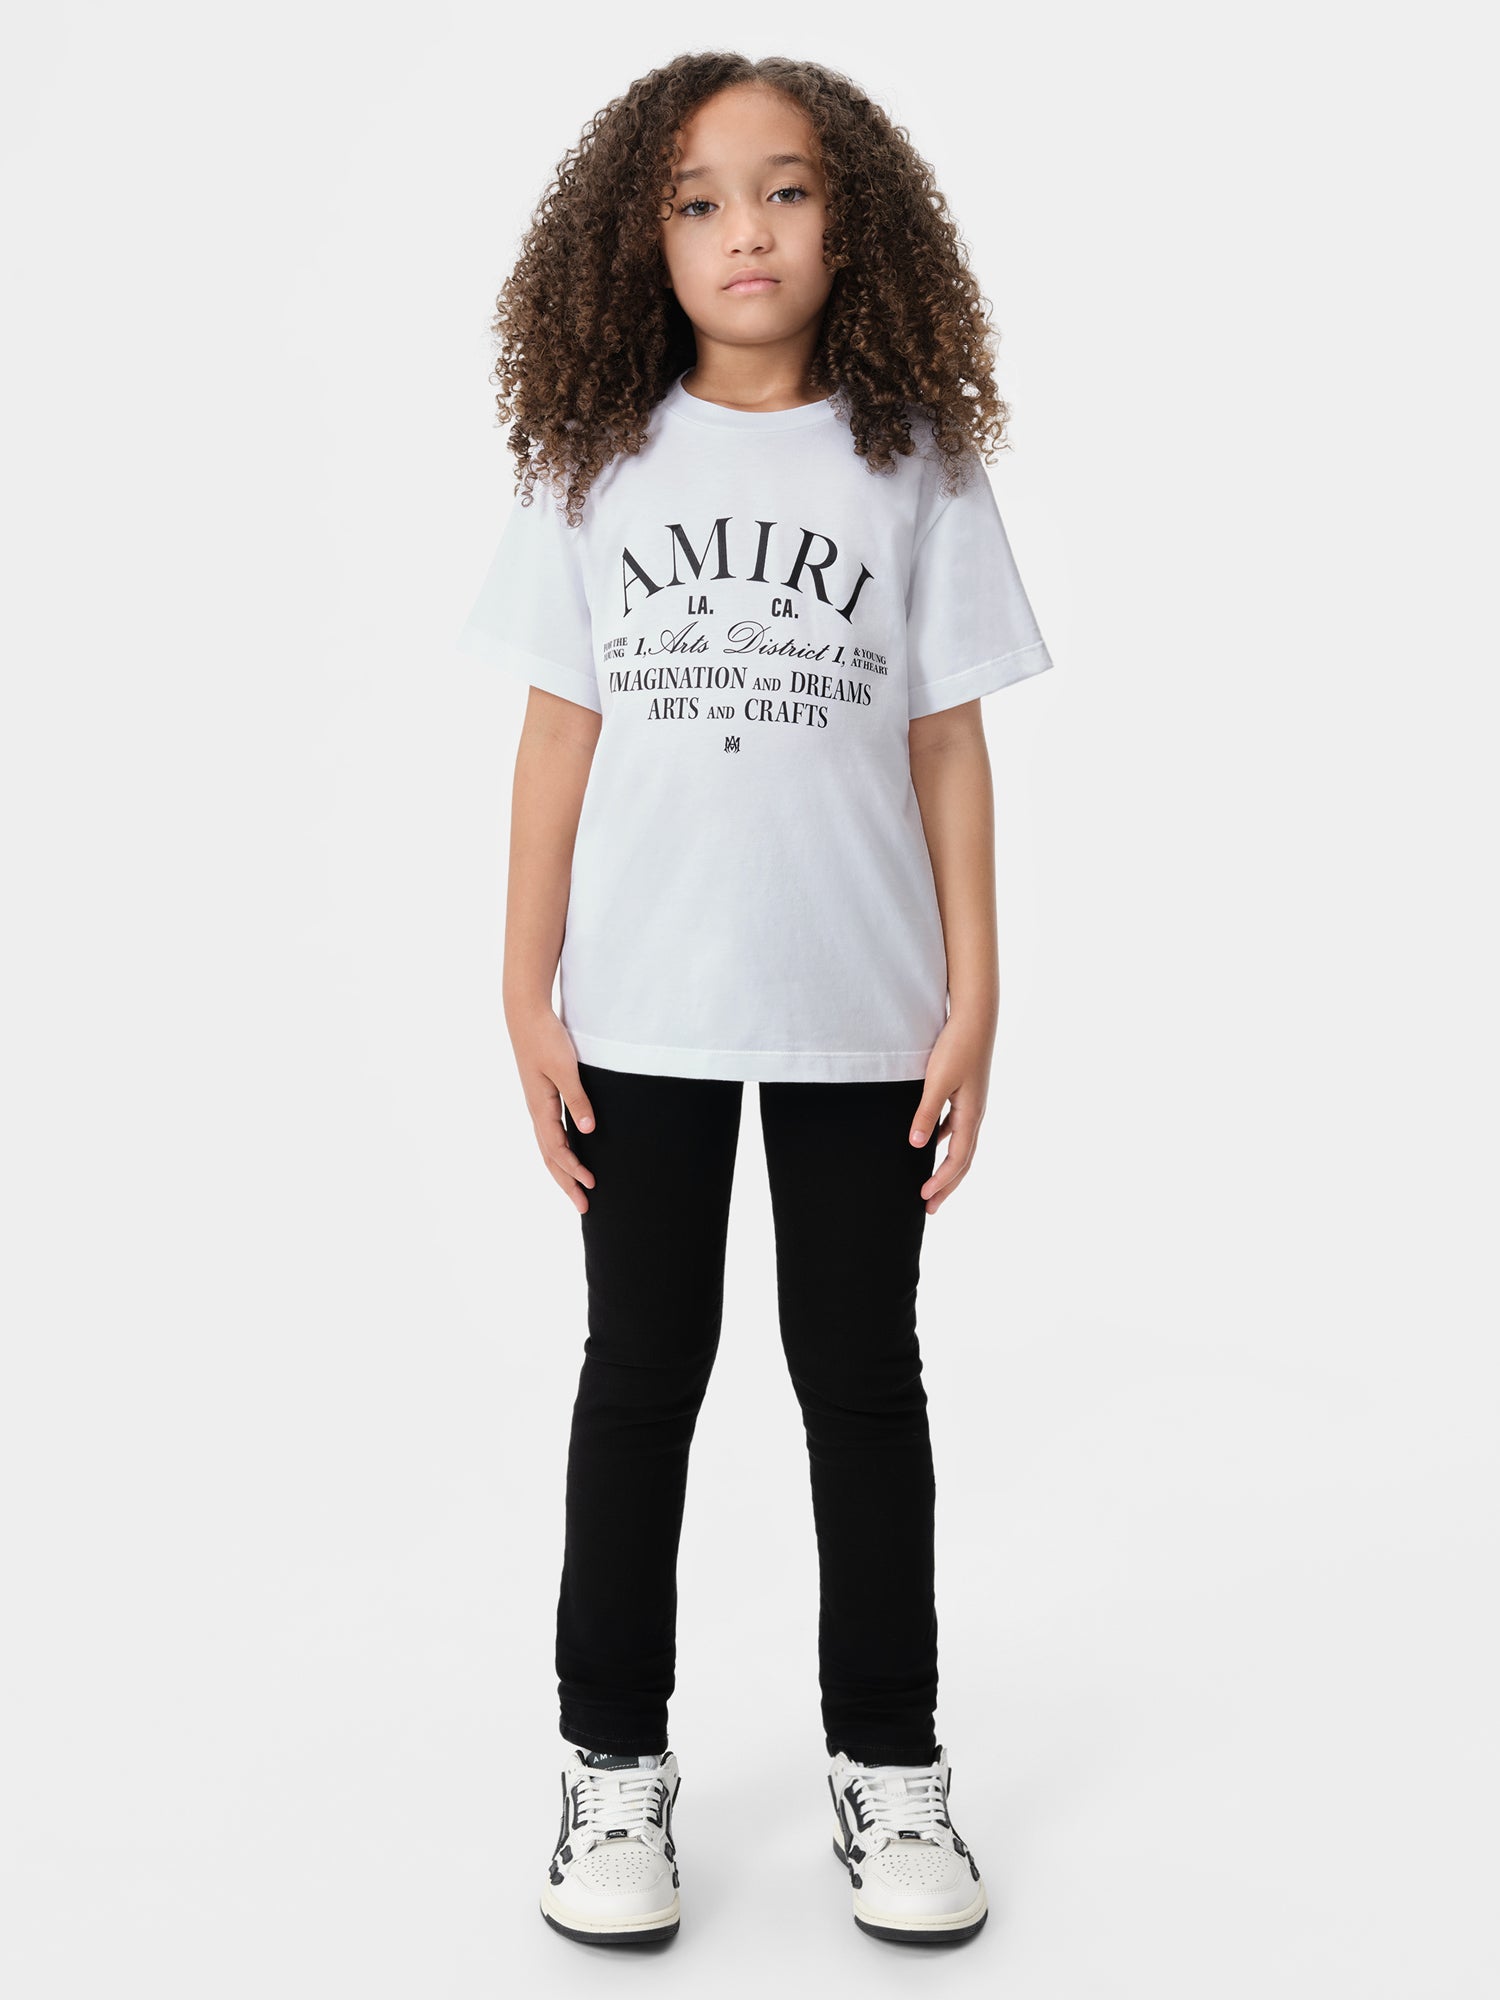 Product KIDS - AMIRI ARTS DISTRICT TEE - White featured image